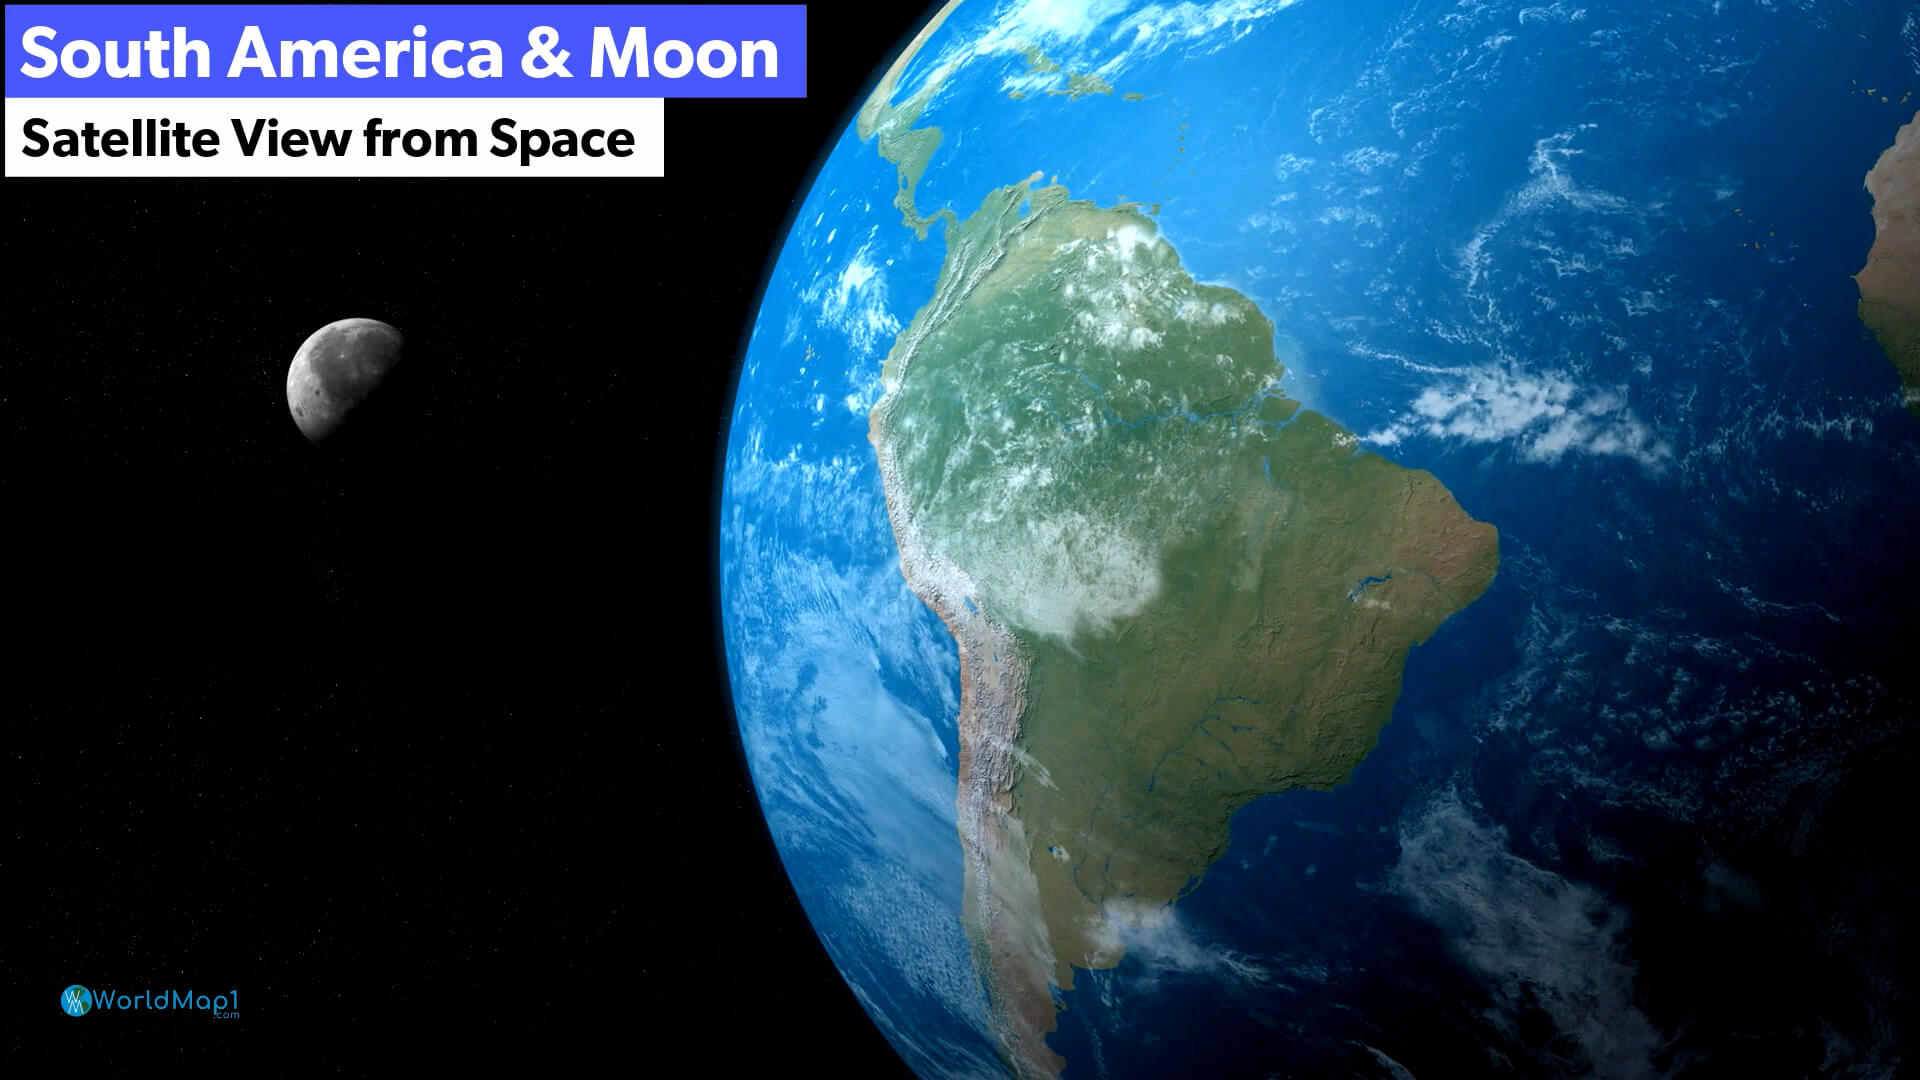 South America and Moon Satellite View from Space